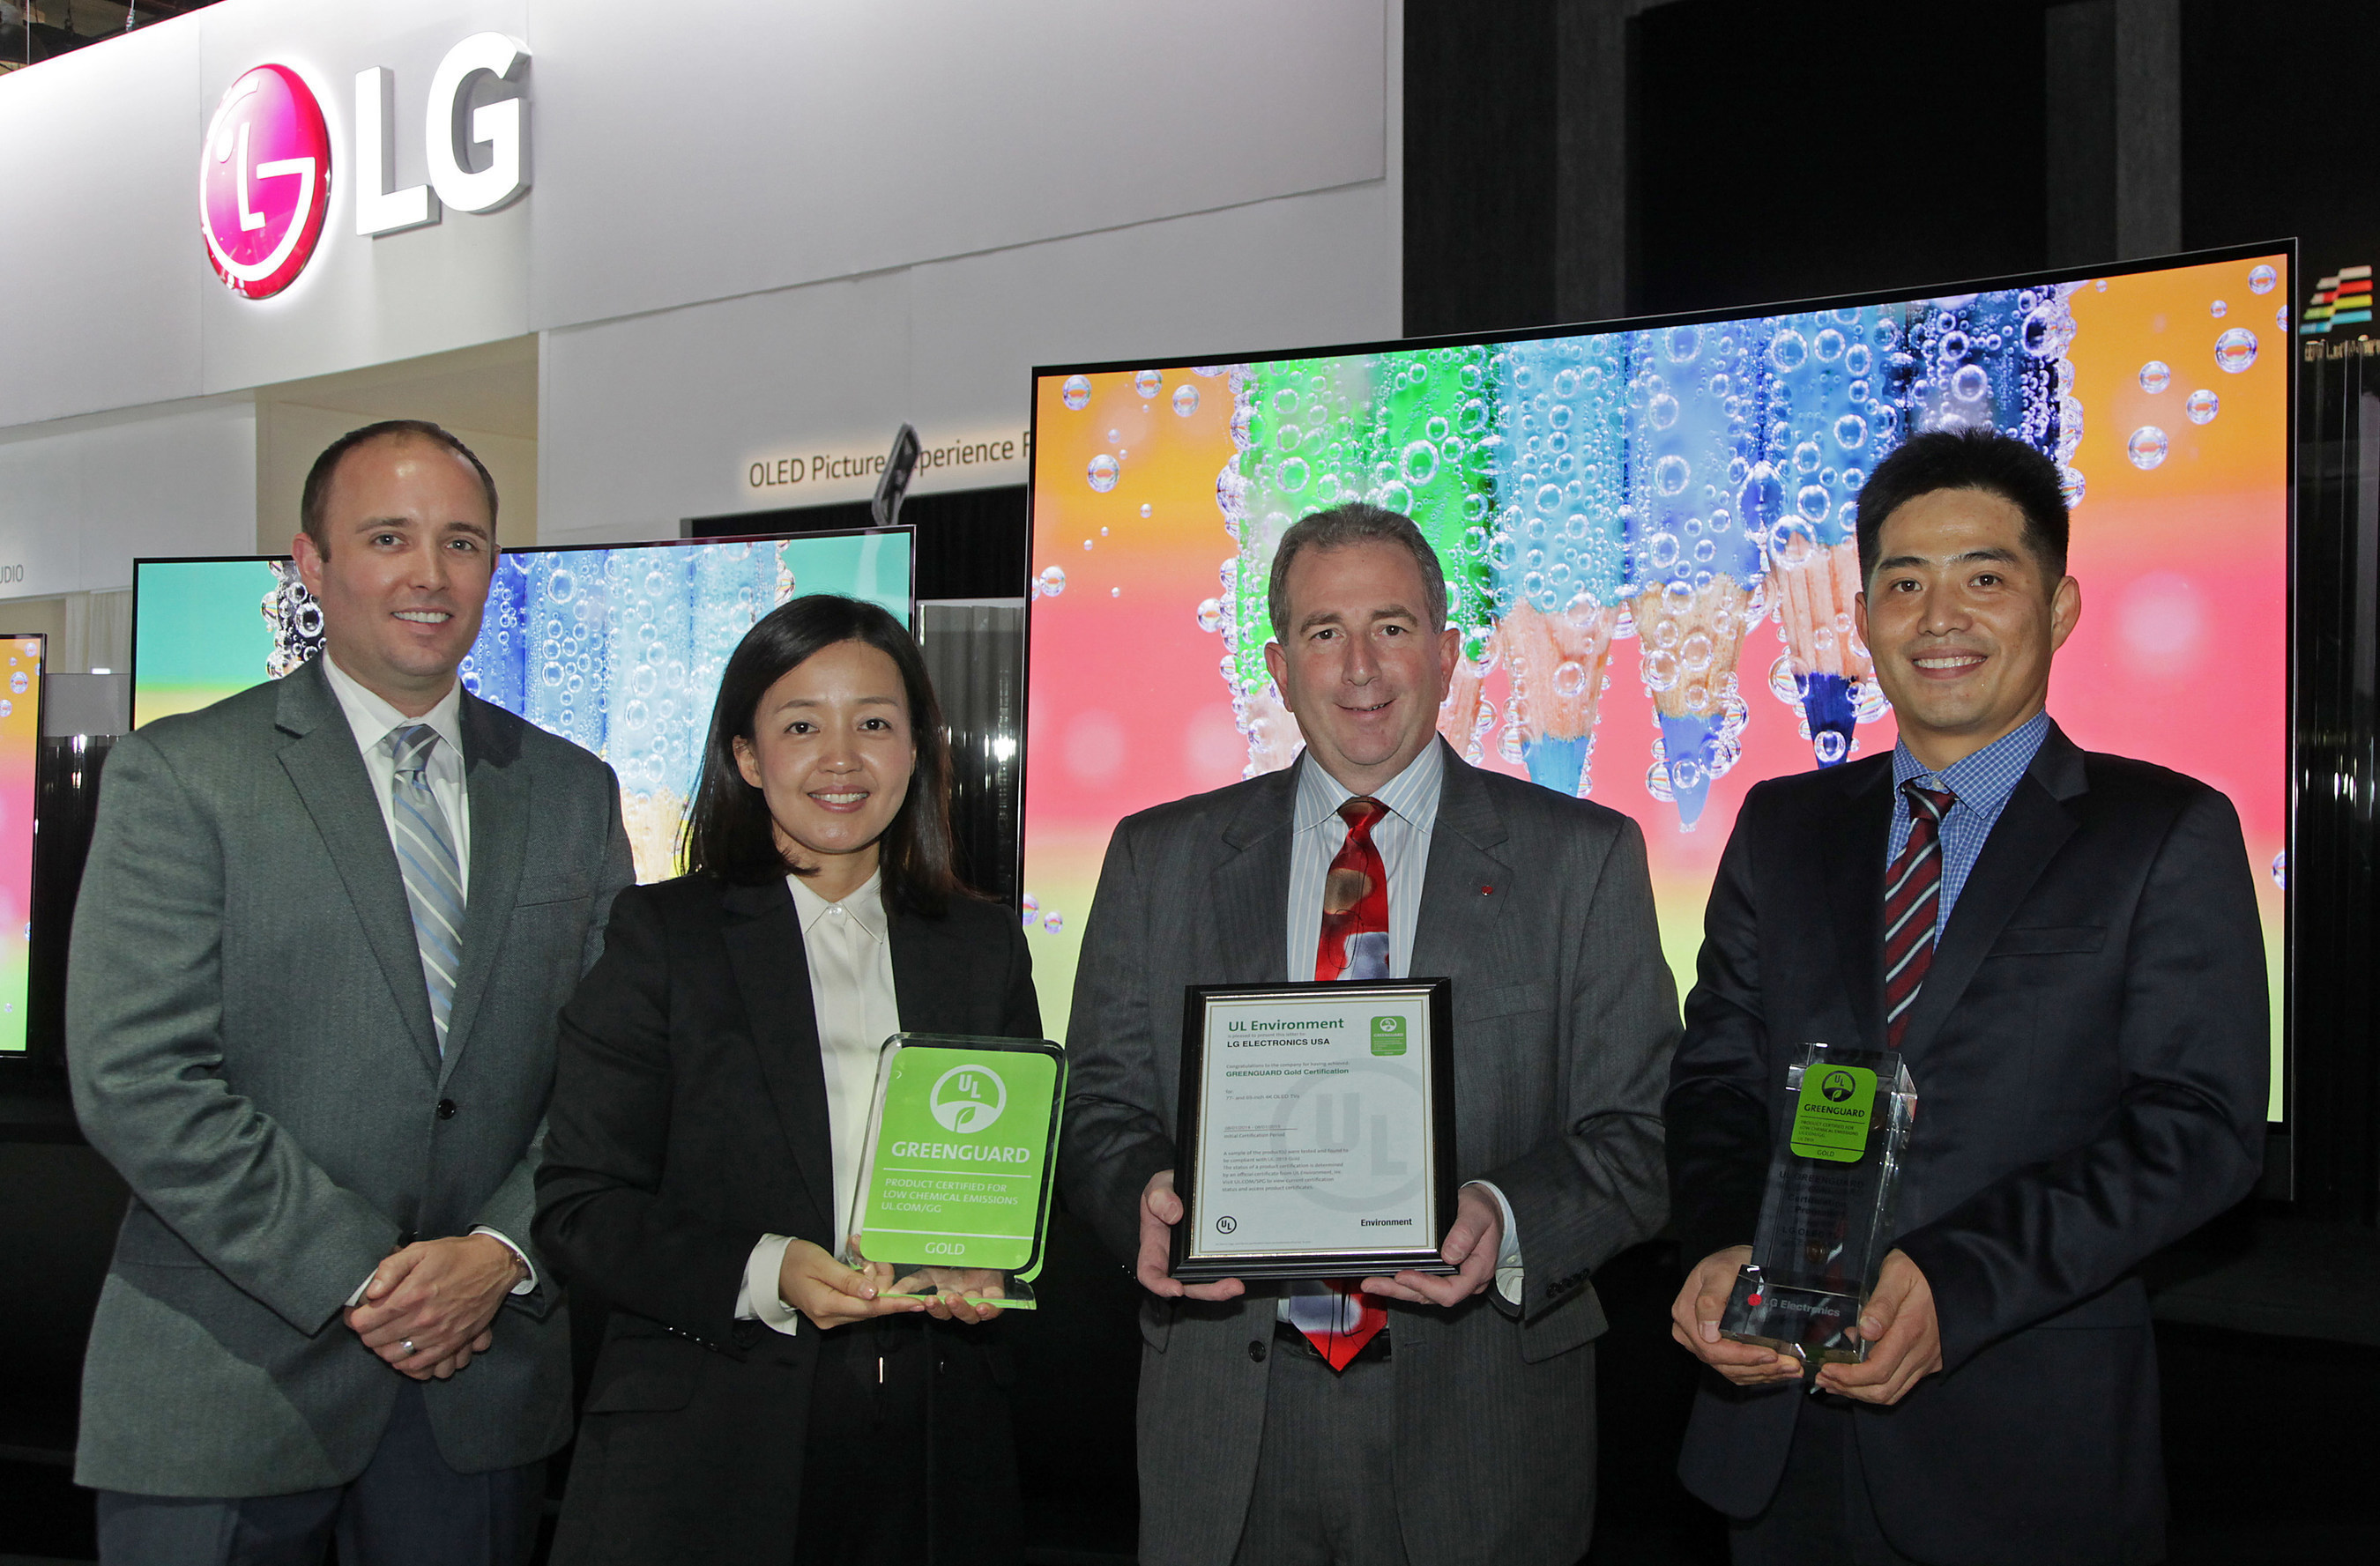 Celebrating UL Environment GREENGUARD certification for LG Electronics' 55-, 65-, and 77-inch class 4K OLED TVs at the 2015 International CES are left to right: Donald Mayer, Global Business Development Manager, UL Environment, Jamie Yeom, Global Account Director, Business Development & Marketing, UL Korea Ltd., Tim Alessi, LG's U.S. Head of New Product Development, and J.C. Lee, LG's U.S. Head of Standards and Environmental Compliance.